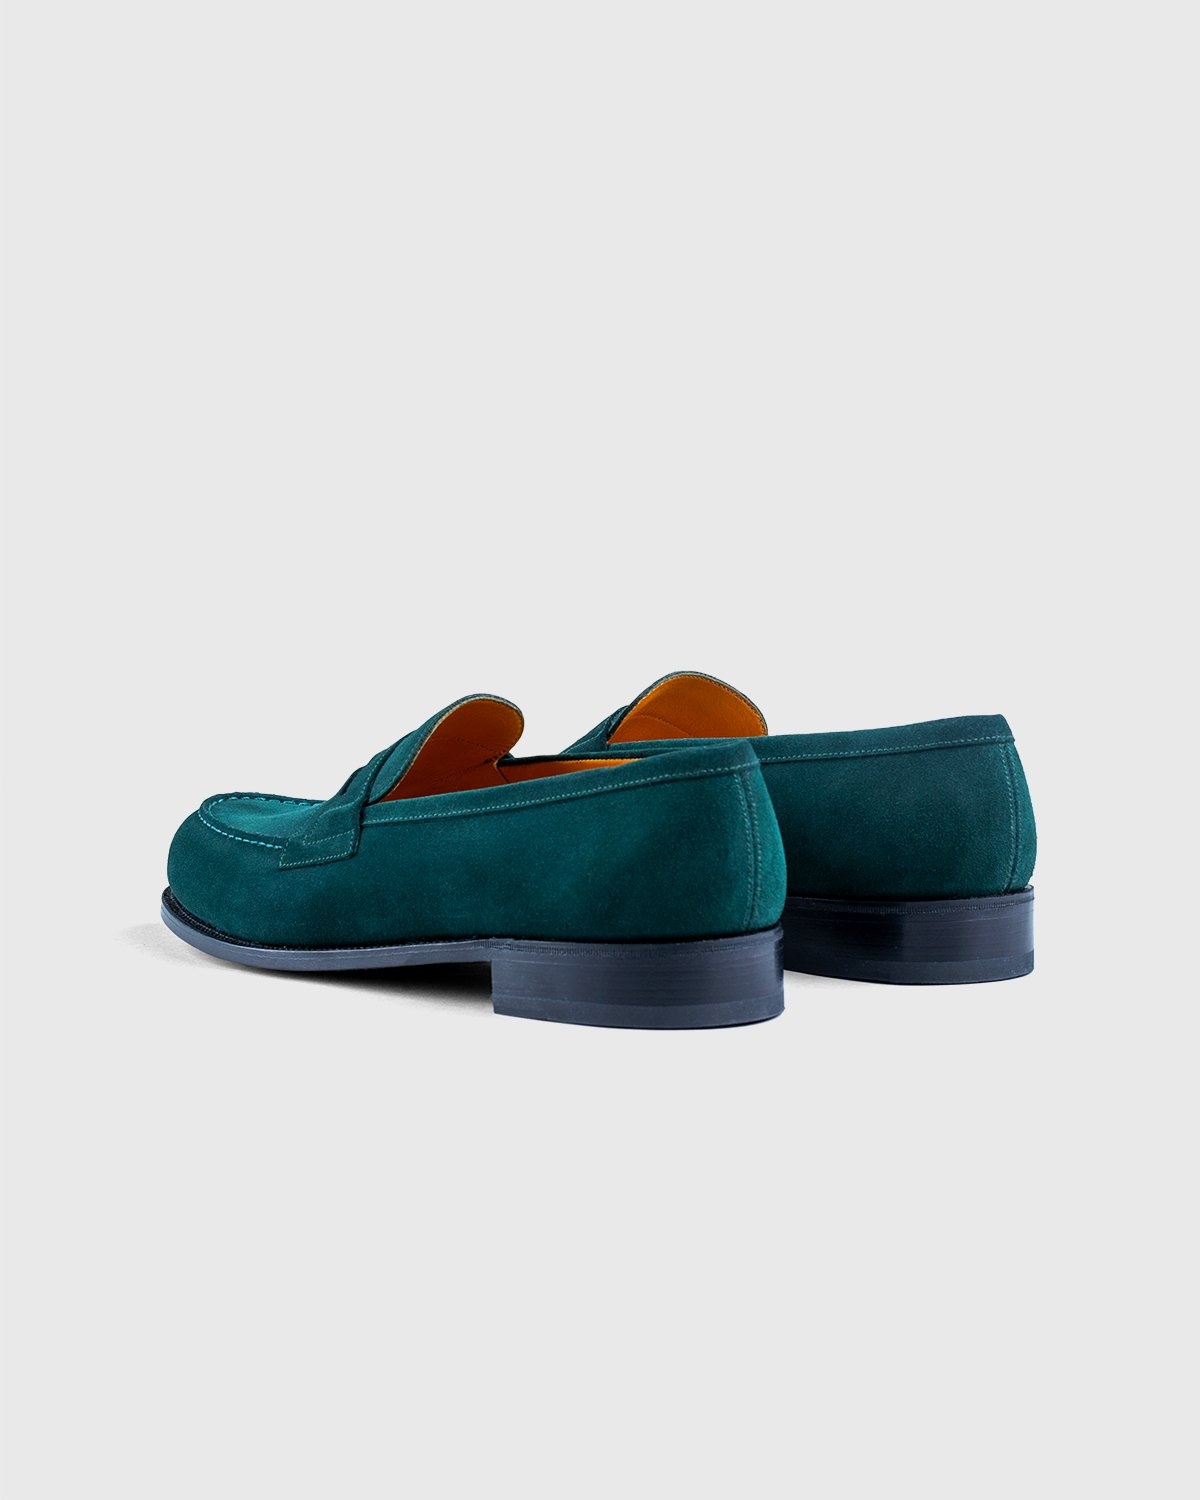 J.M. Weston x Highsnobiety – 180 'Penny' Loafer - Loafers - Green - Image 3